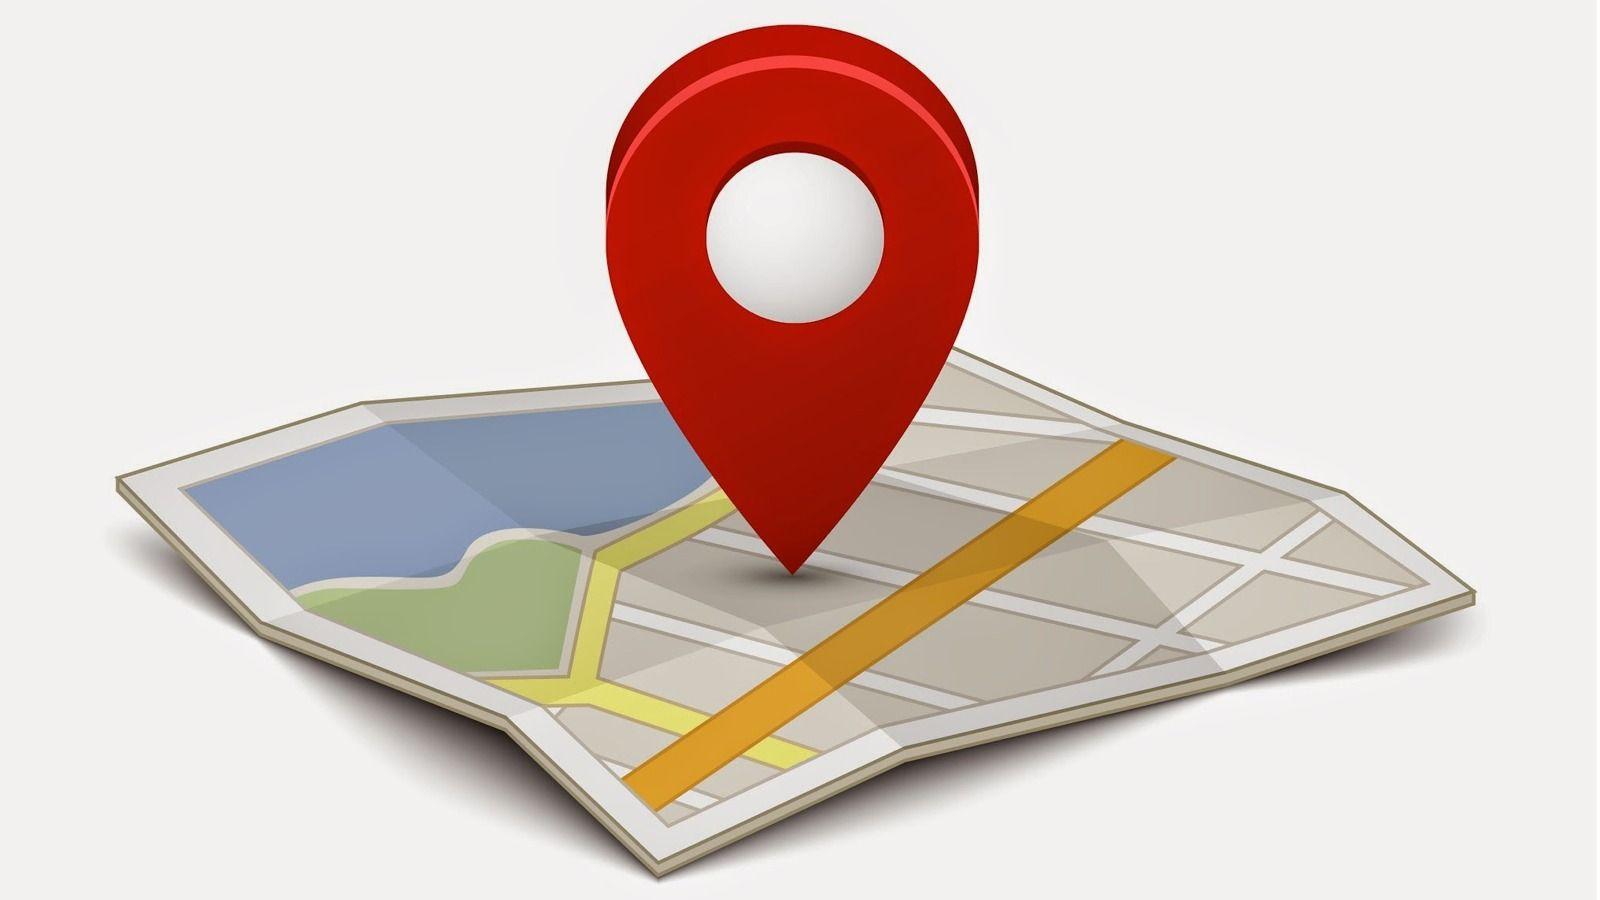 Google Business Listing Logo - Local Business Listings Sites That Will Get You Referral Traffic